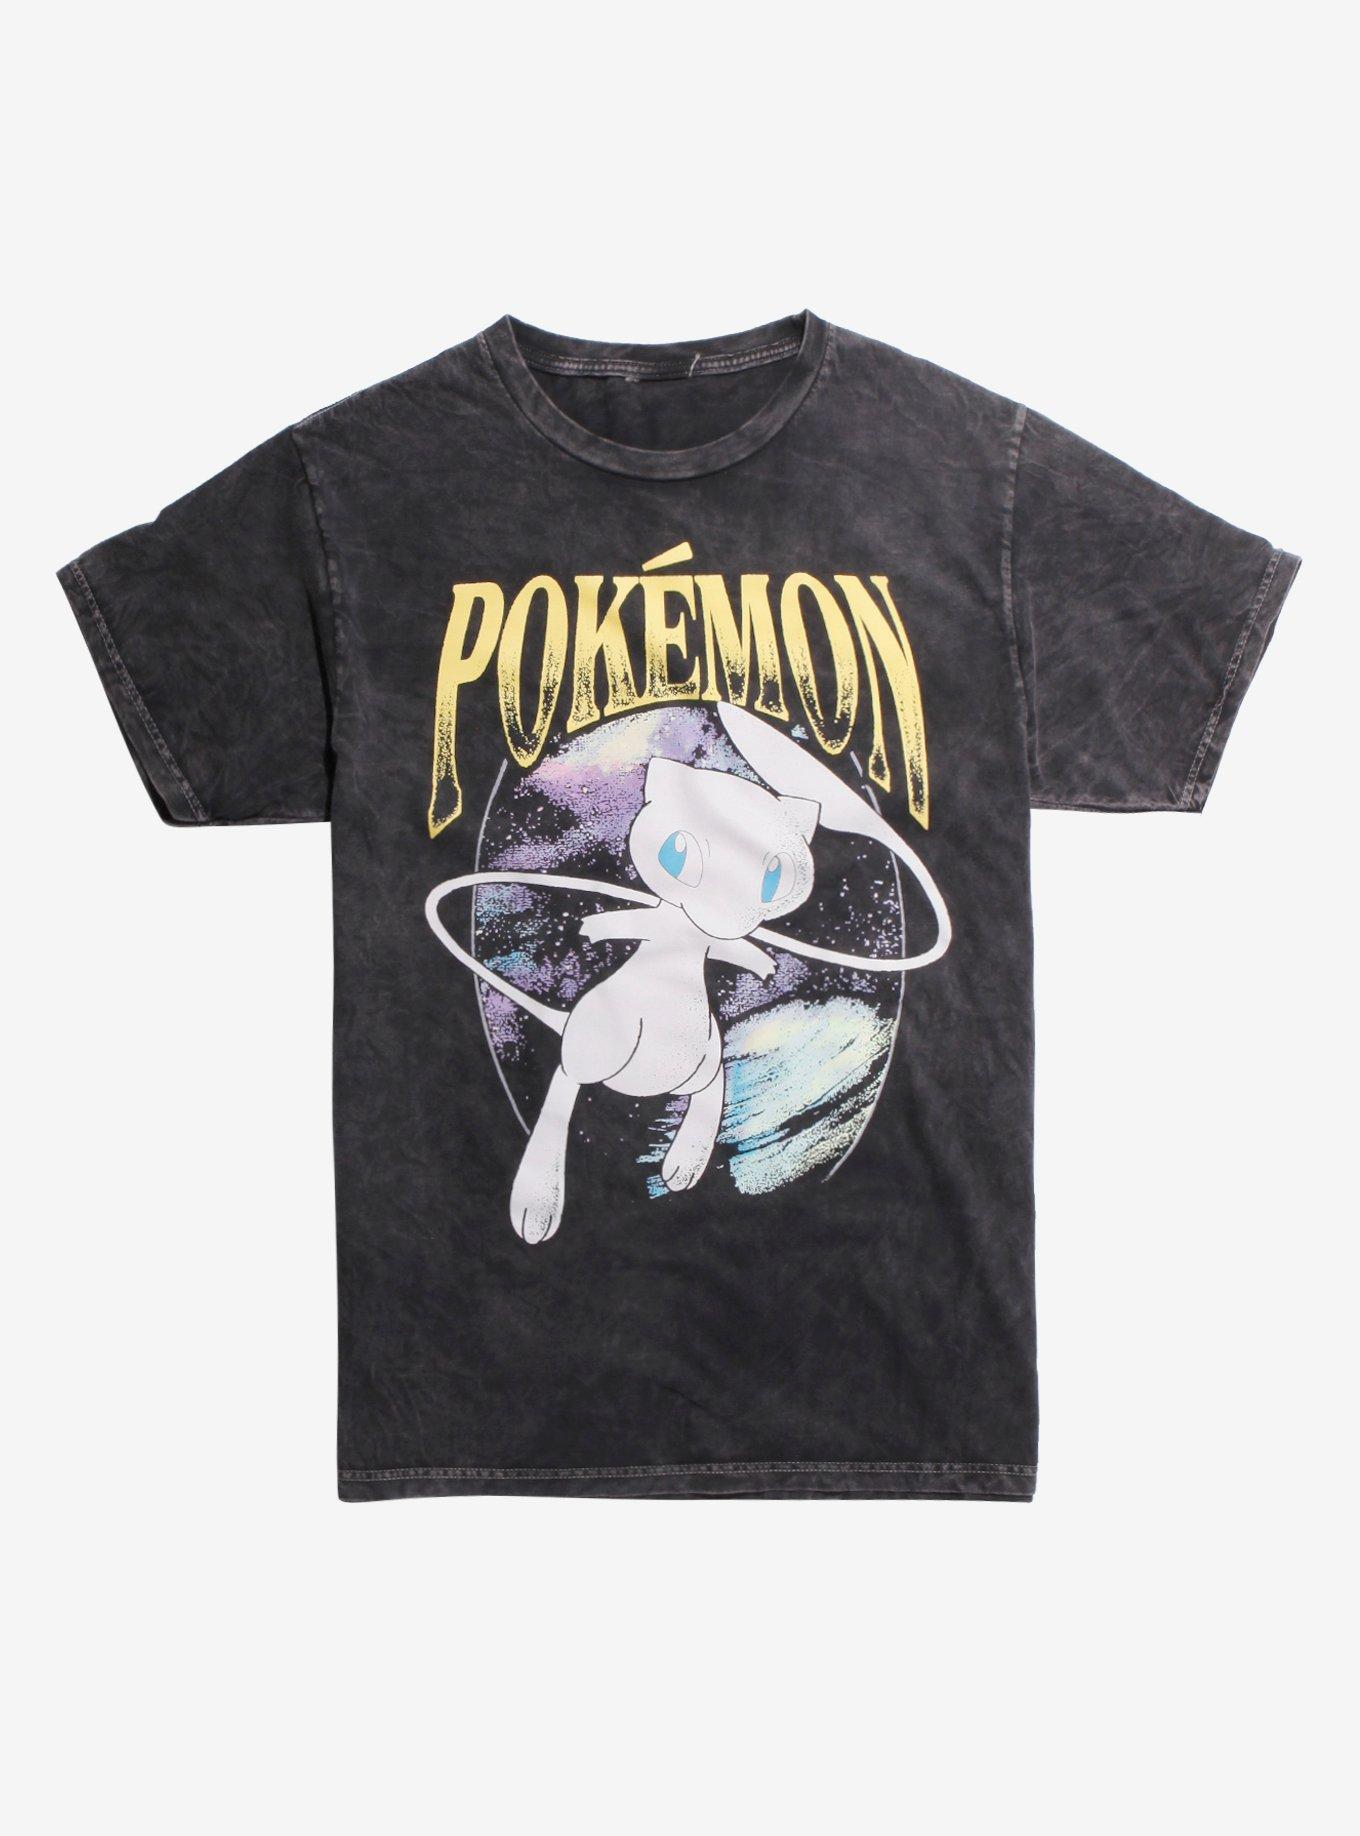 Pokemon Mew Space T-Shirt Hot Topic Exclusive | Hot Topic